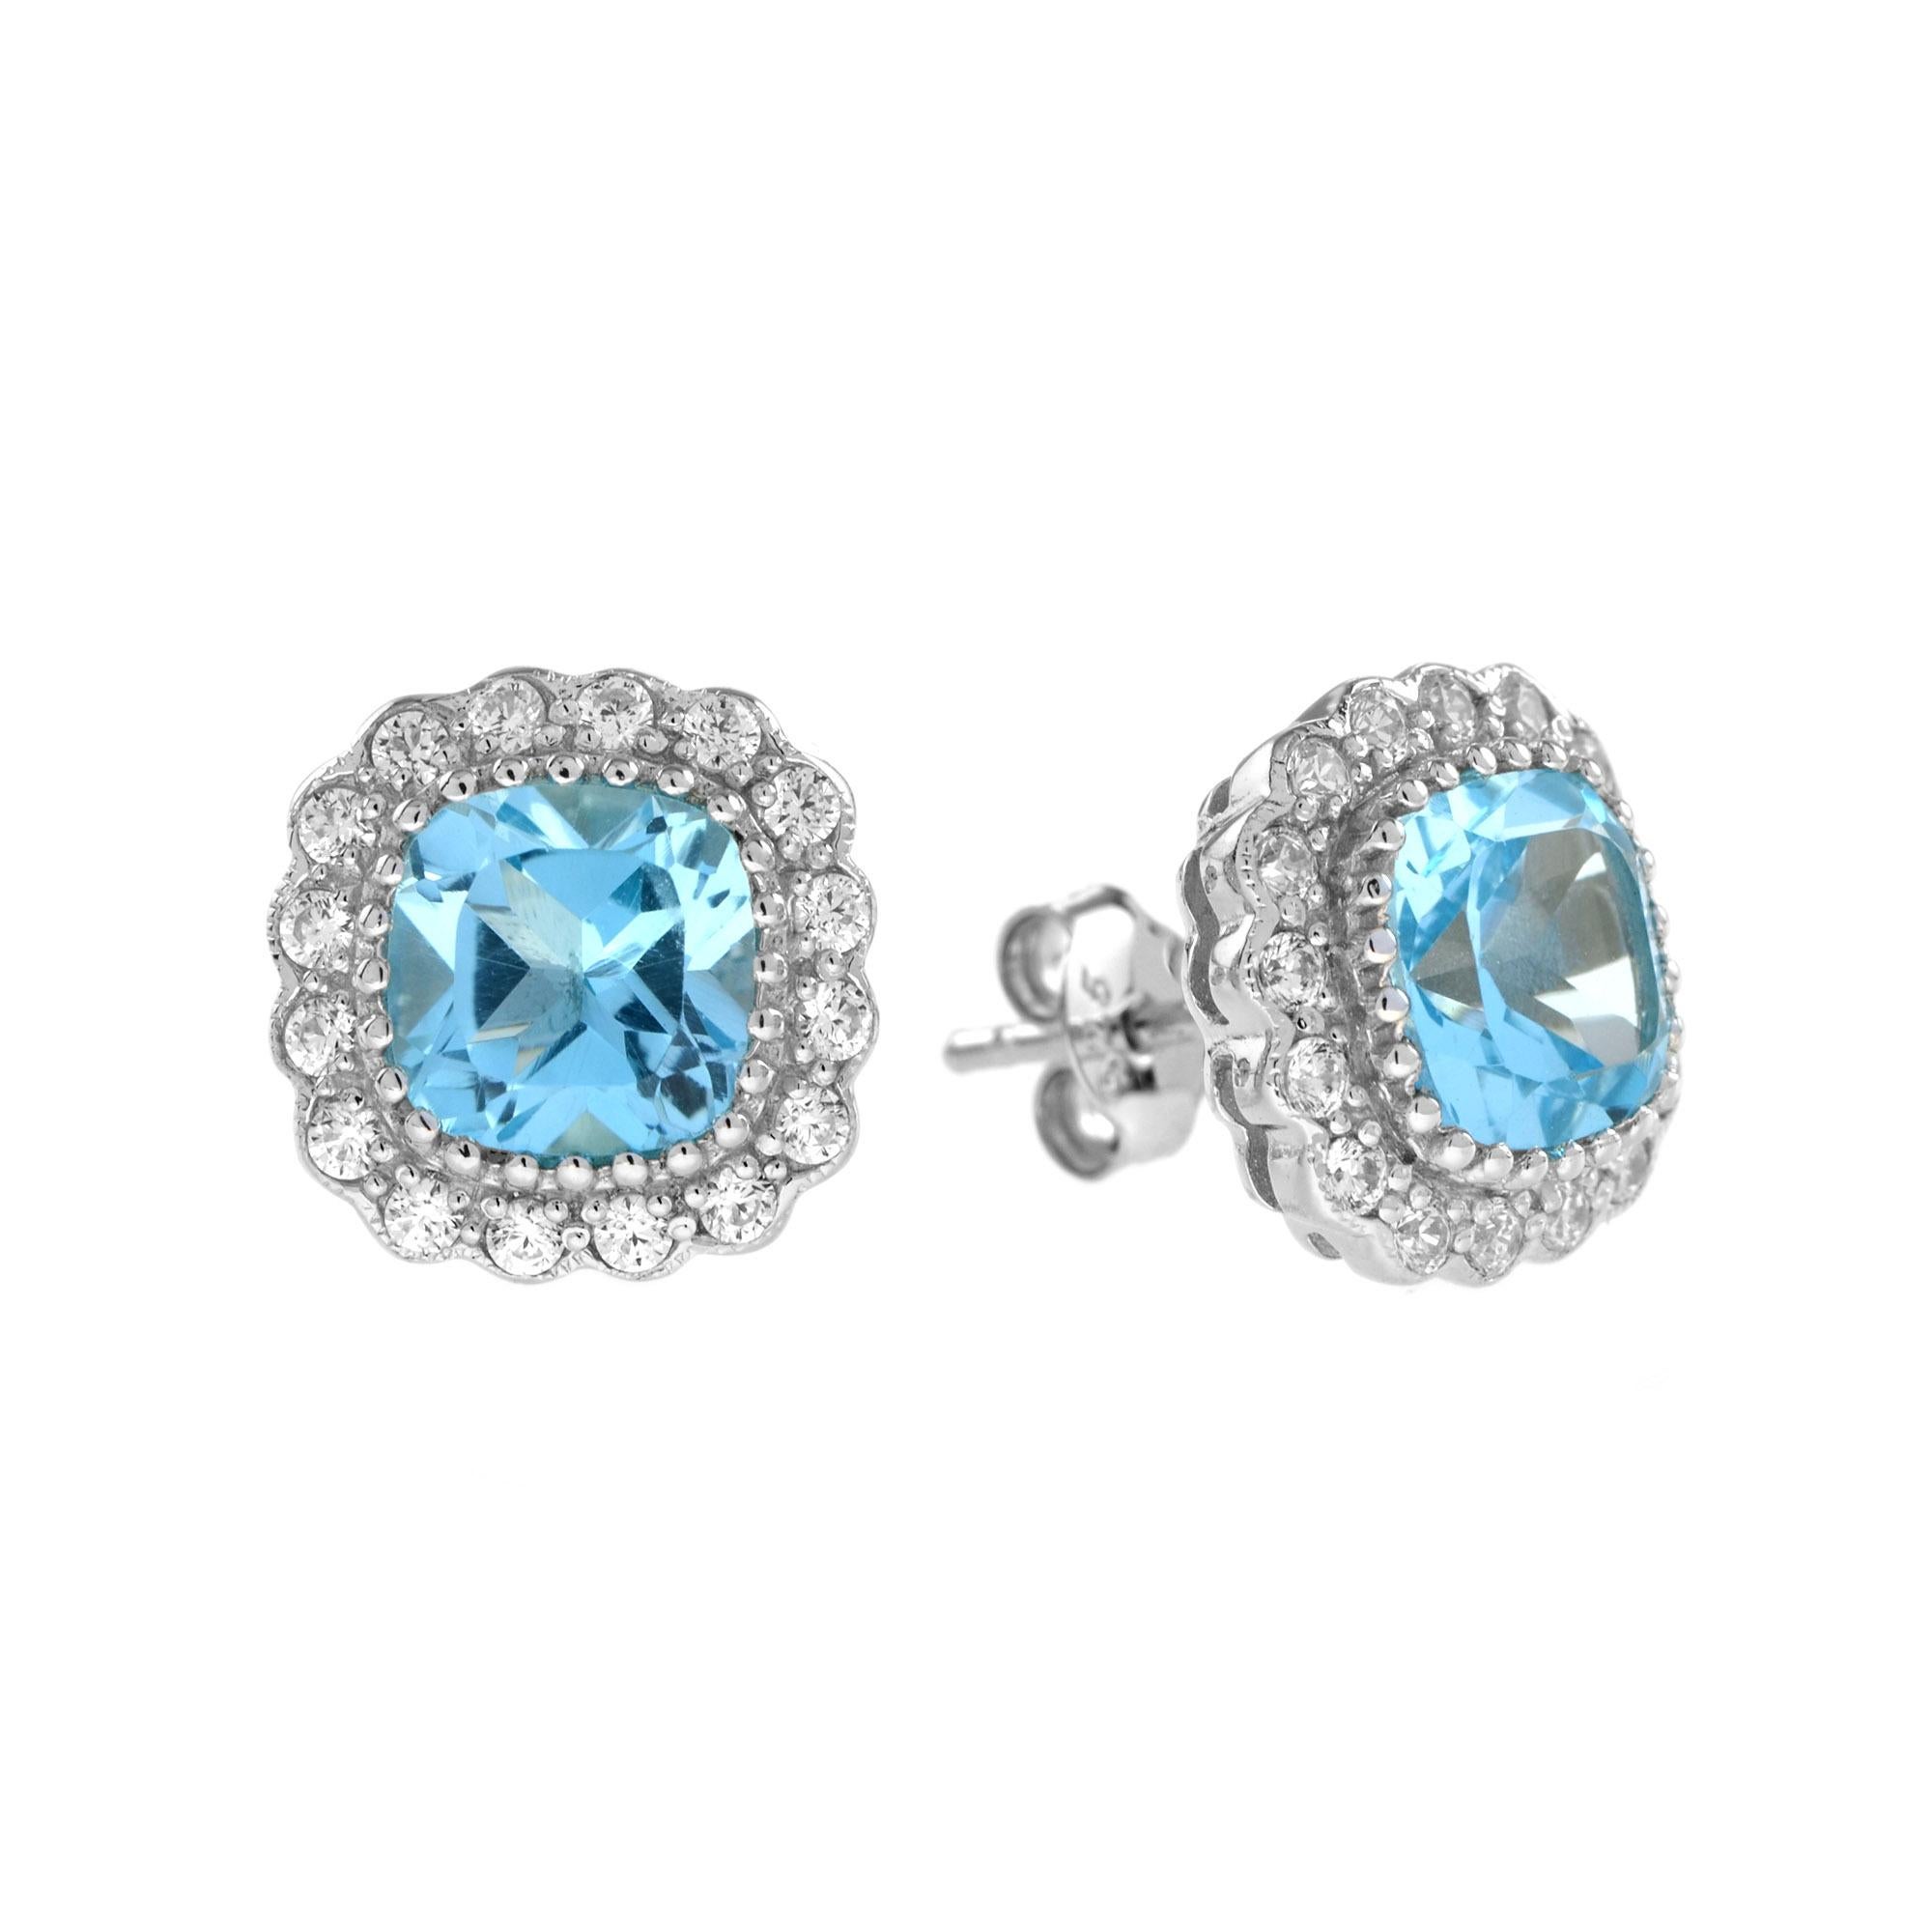 This gorgeous 14k white gold halo earrings and pendant feature a total of 5.70 carat cushion-cut blue topaz  surrounded by a halo of diamonds. An effortless upgrade to your accessary wardrobe. Wear them together for your perfect look. 

Earrings